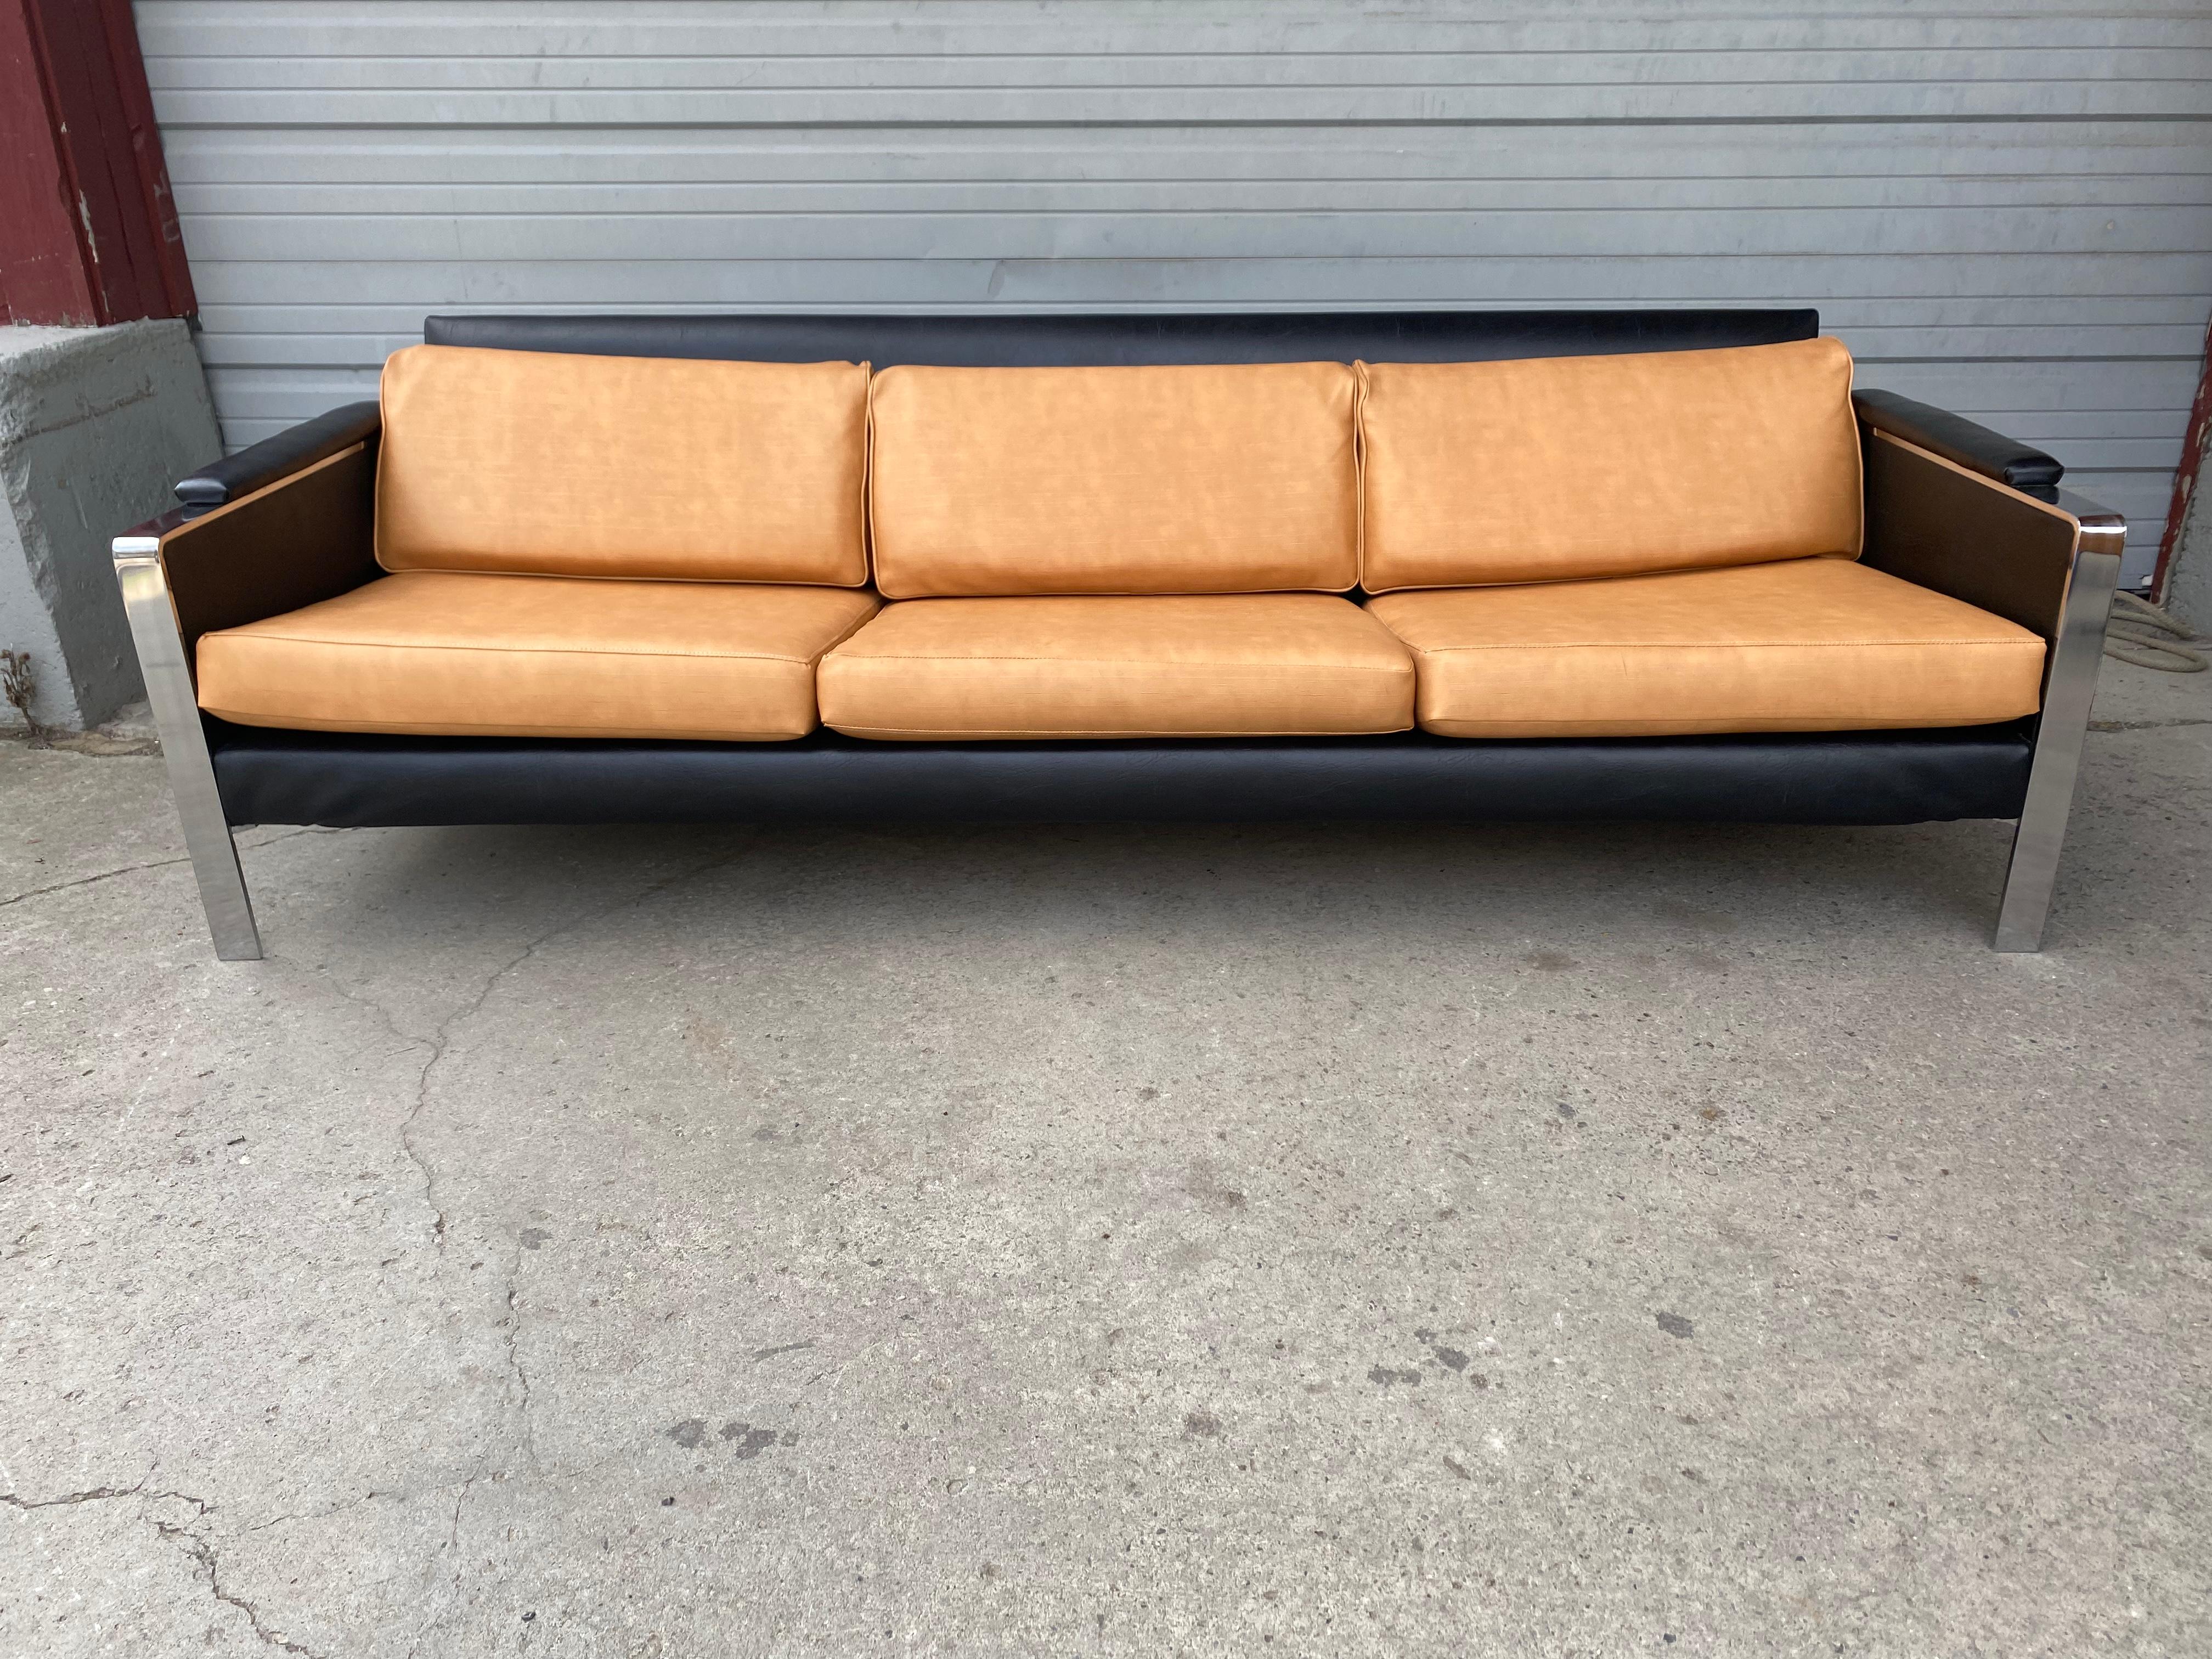 Classic Modernist Chromed Steel and Naugahyde Low Profile Sofa, Milo Baughman In Good Condition For Sale In Buffalo, NY